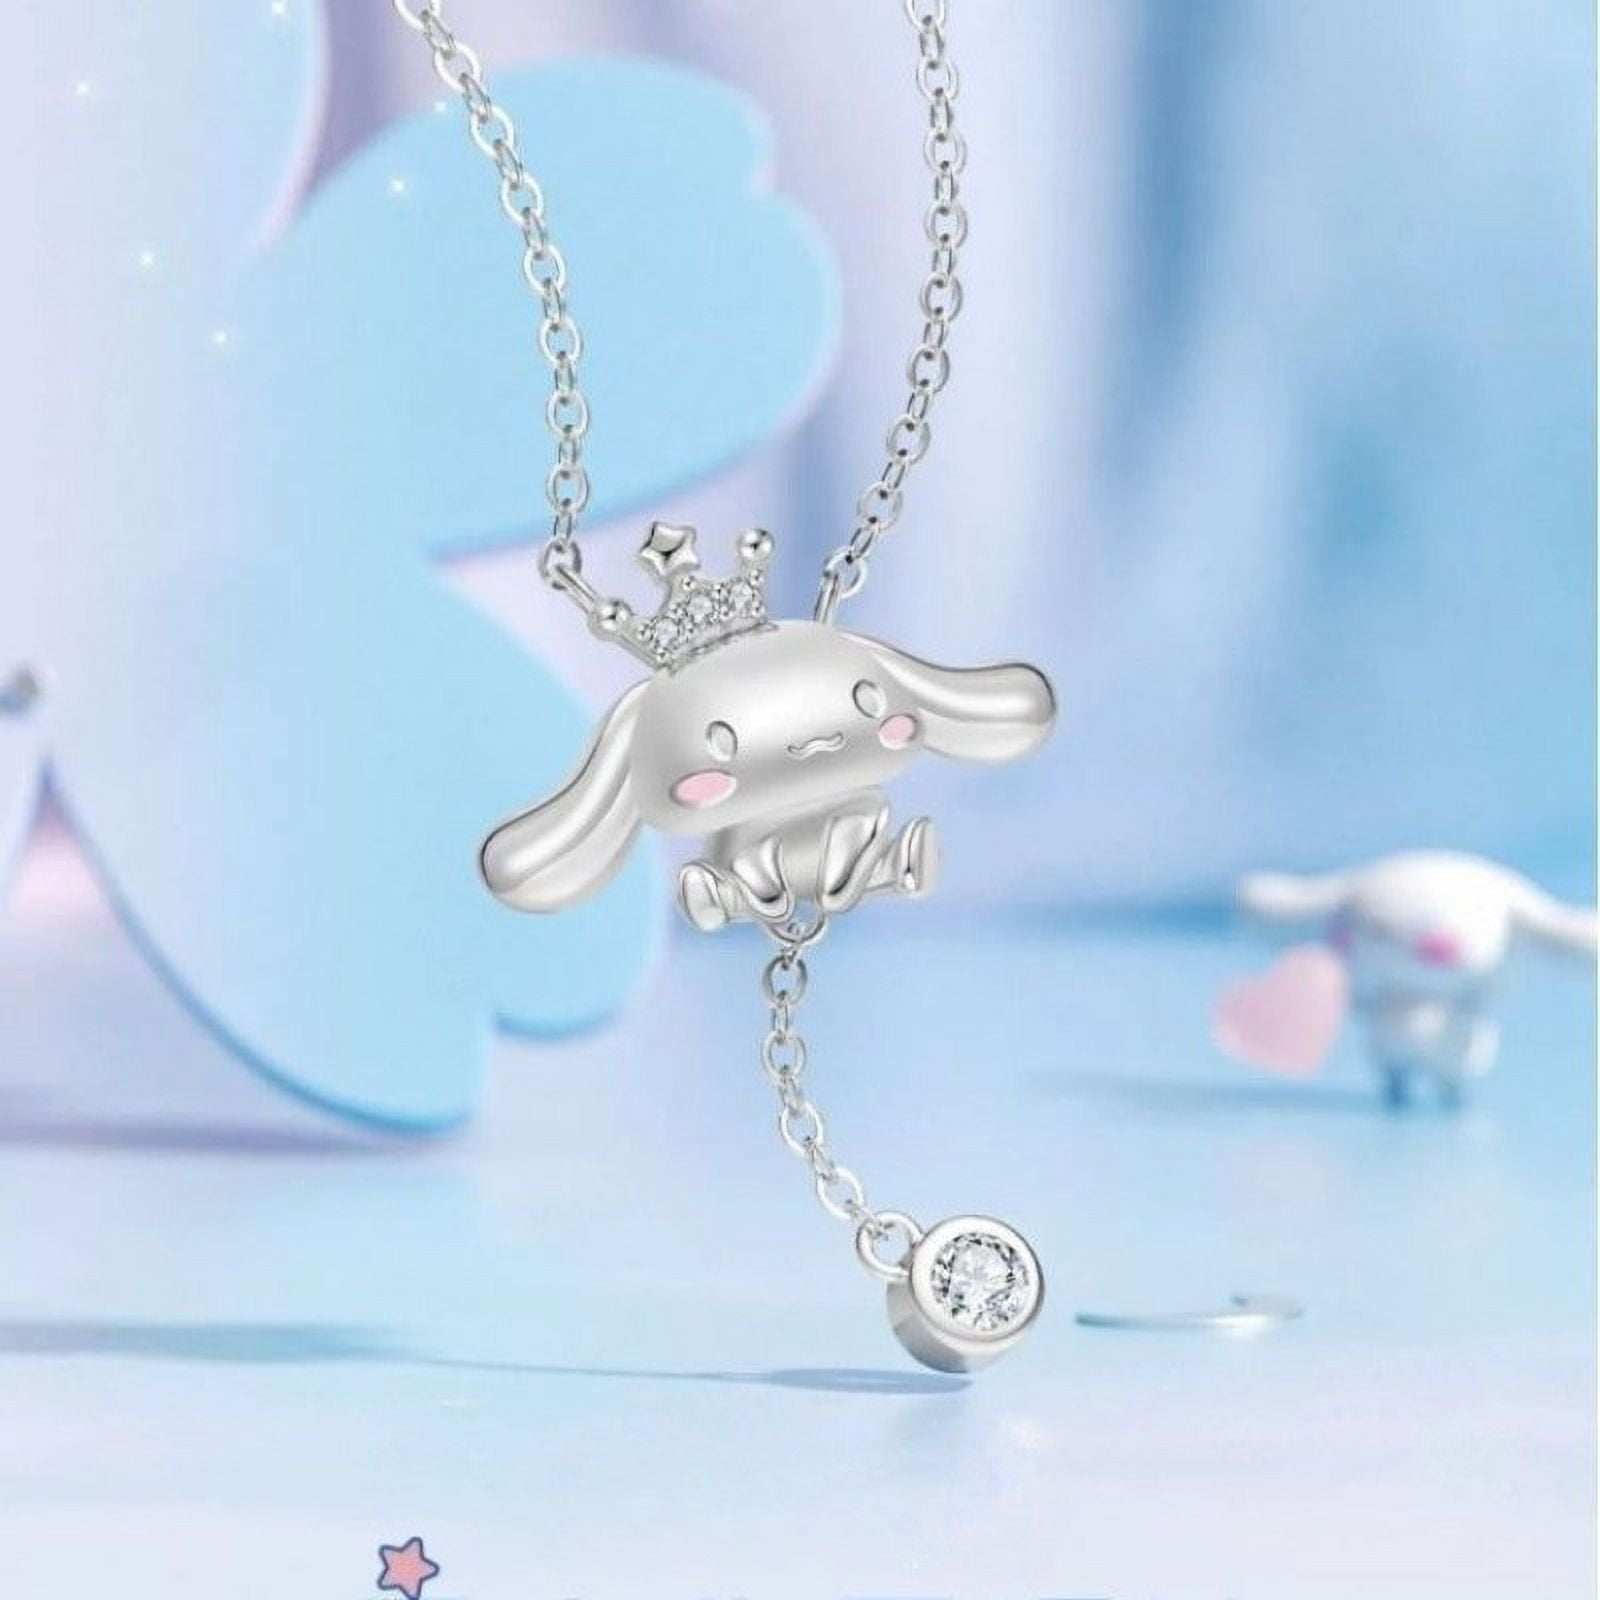 Cute Sanrio Necklace Cinnamoroll Kawaii 925 Silver Pendant Clavicle Chain  Ornaments Girl&Child Birthday Gifts Jewelry Lover Gift